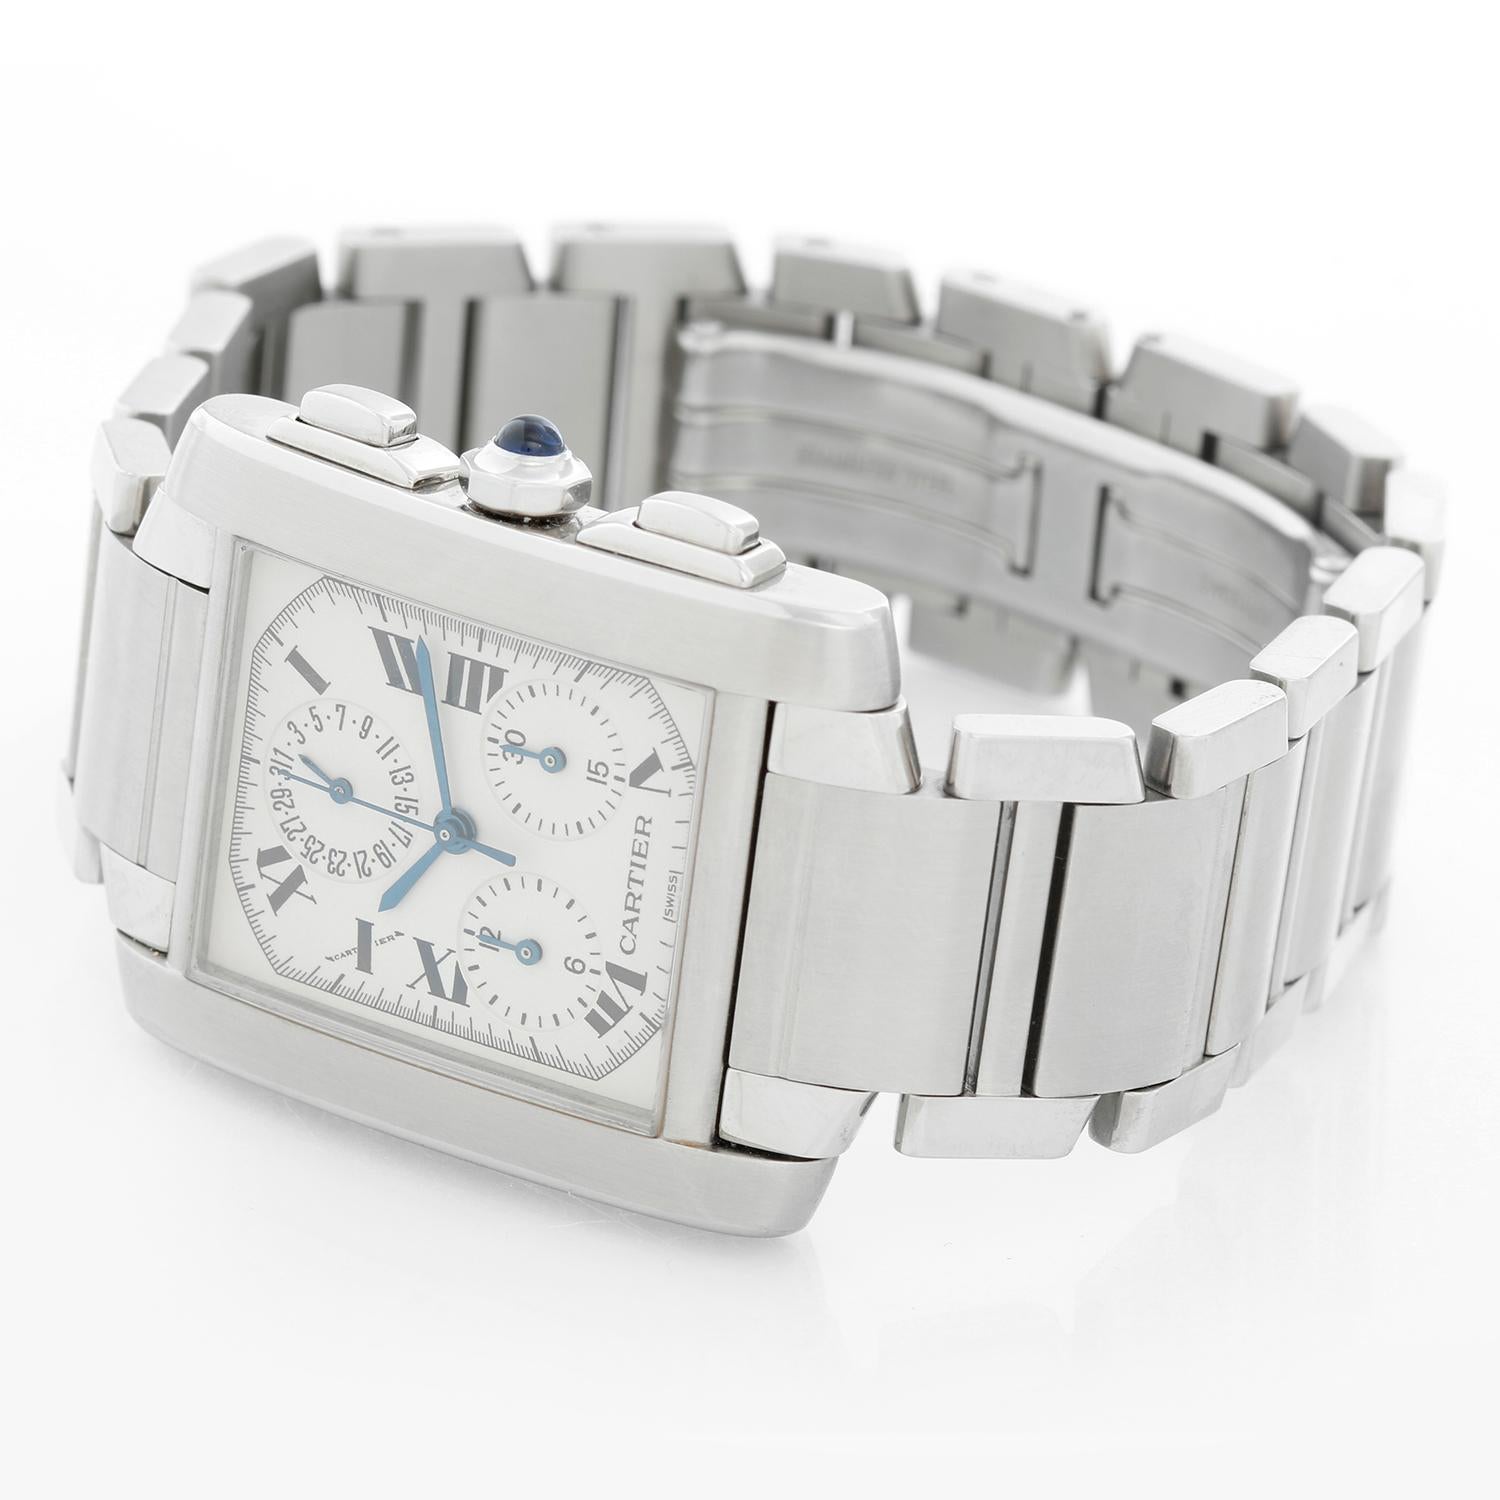 Cartier Tank Francaise Chronograph Men's Watch W51001Q3 - Quartz. Stainless steel rectangular style case (28 mm x 32 mm) . Ivory colored dial with black Roman numerals. Stainless steel Cartier bracelet. Pre-owned with Cartier box.